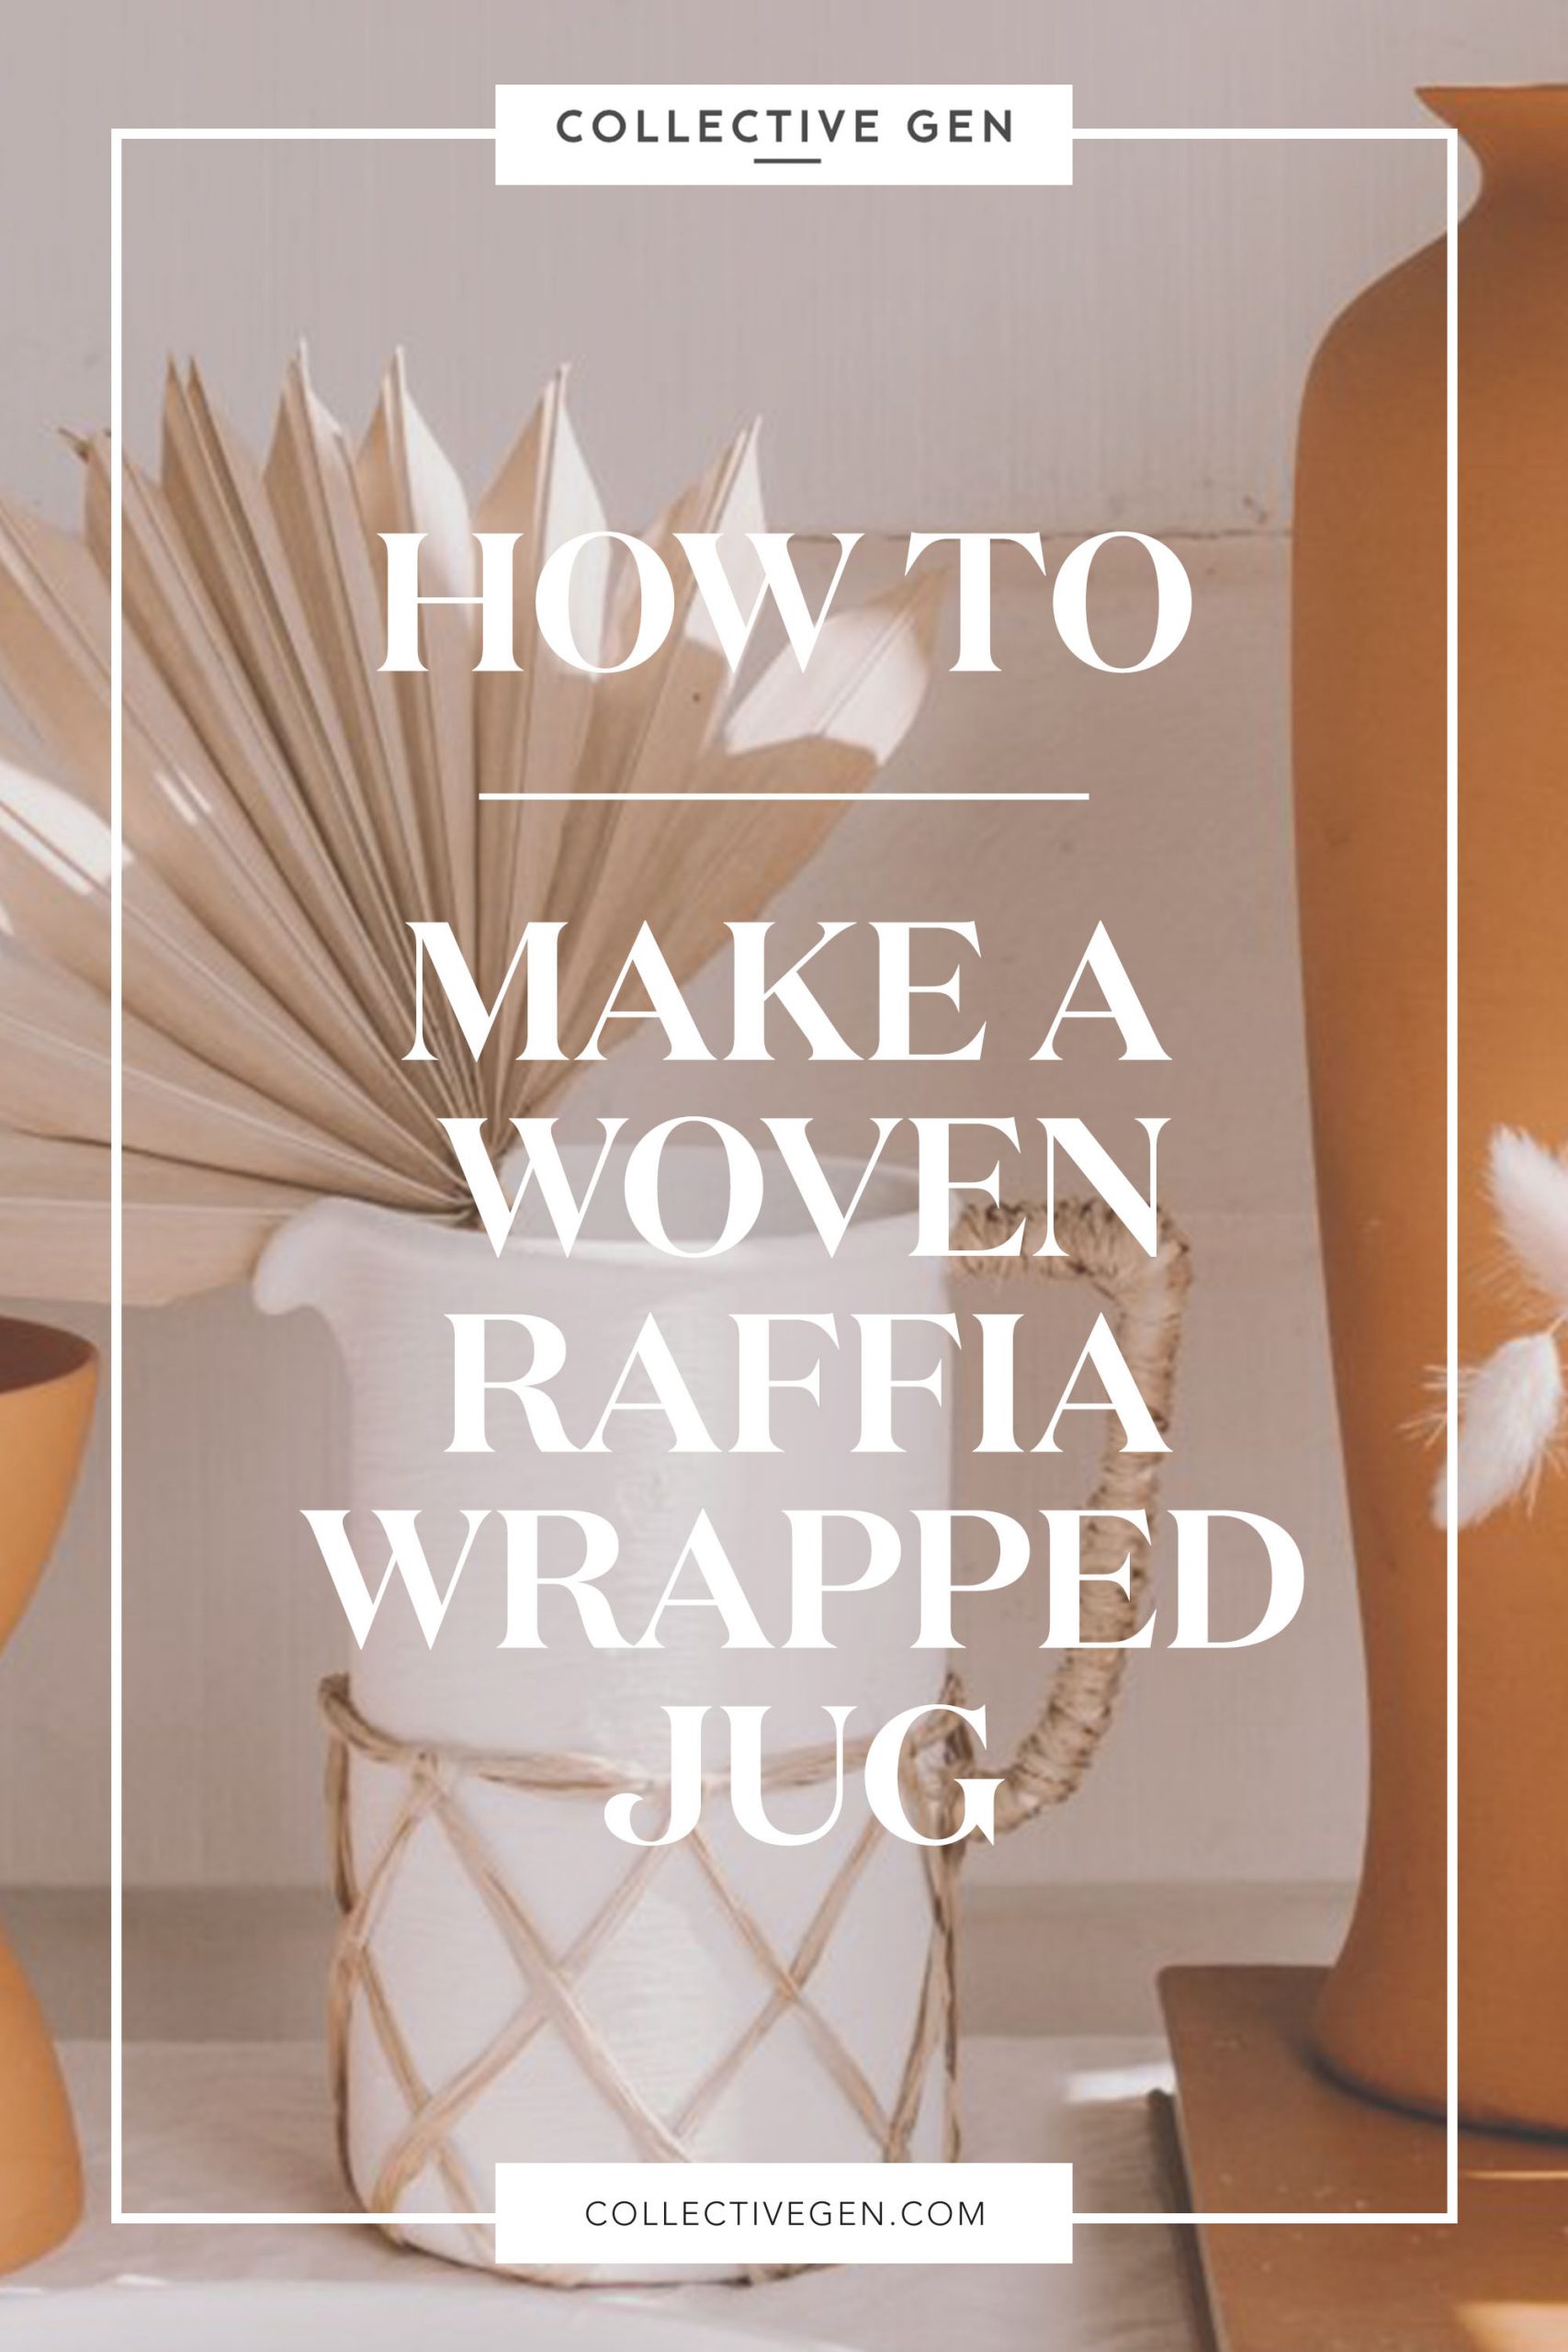 Make this Woven Raffia Wrapped Jug | Collective Gen